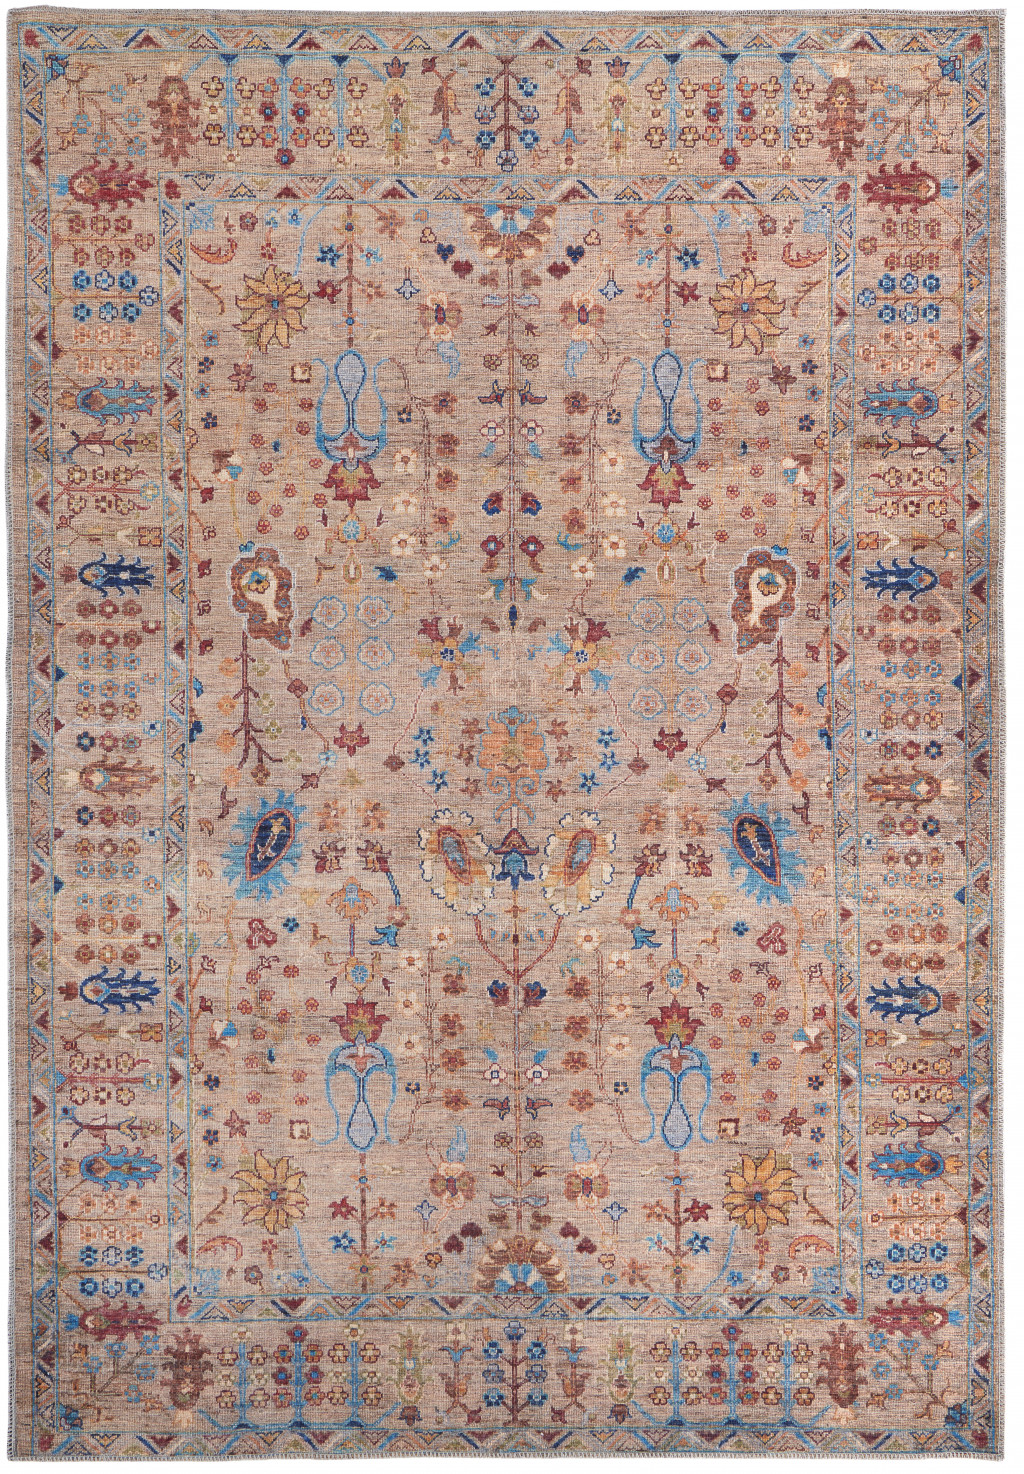 5' X 8' Tan Pink And Blue Floral Power Loom Area Rug-515162-1